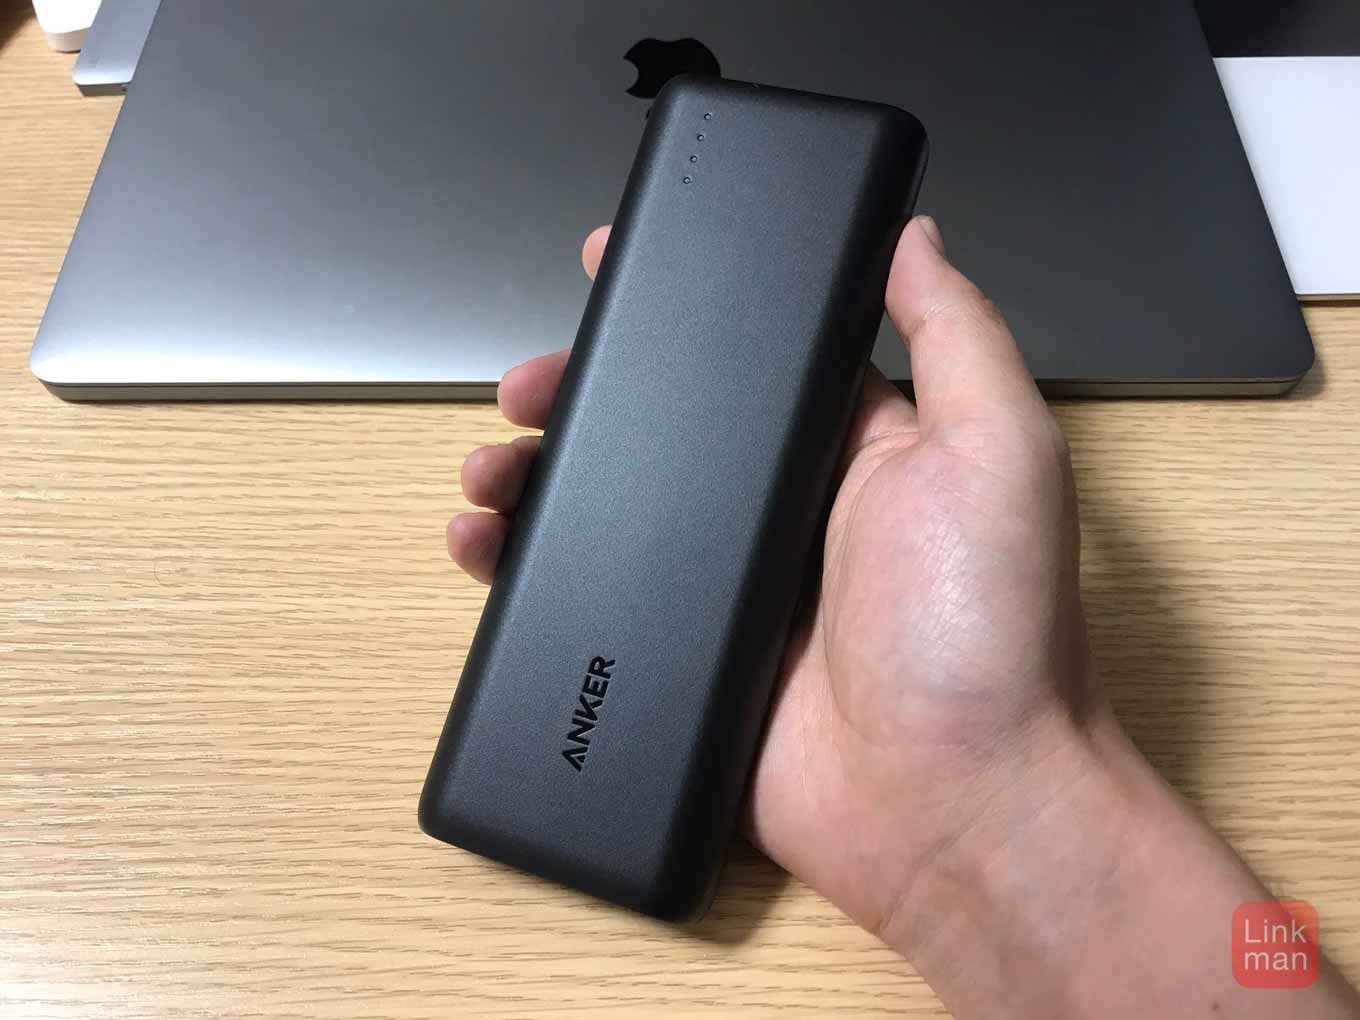 Anker、Quick Charge 3.0に入出力対応した「【第2世代】Anker PowerCore Speed 20000」の販売を開始